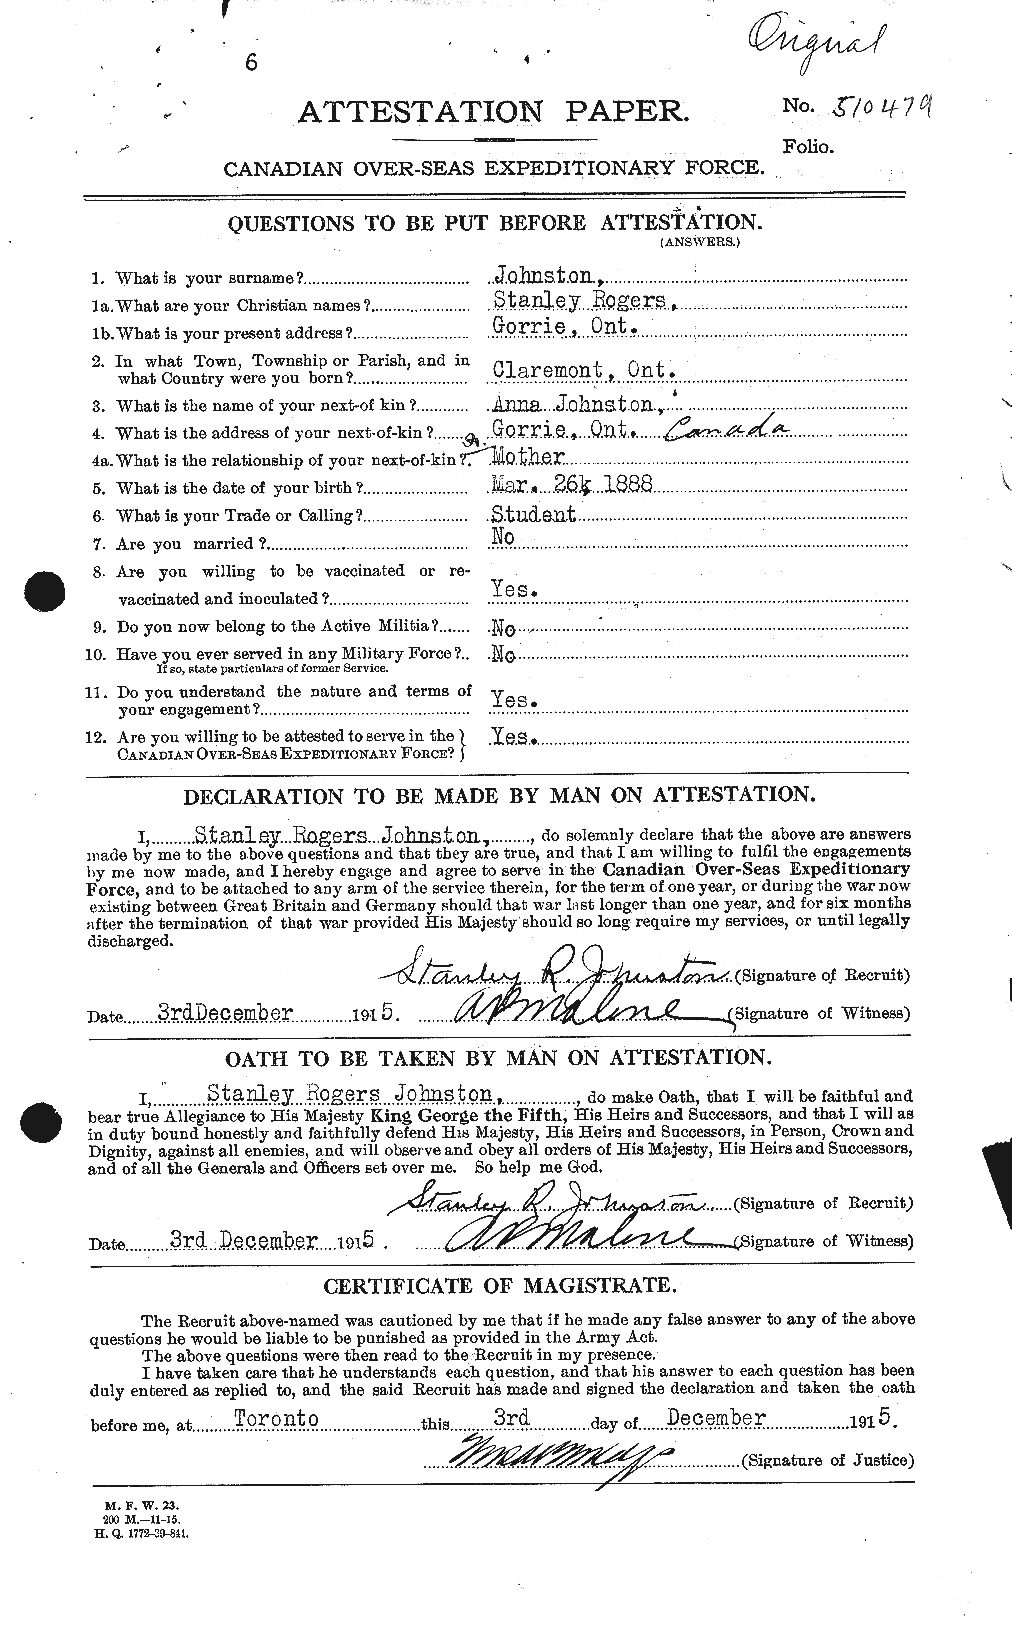 Personnel Records of the First World War - CEF 427107a